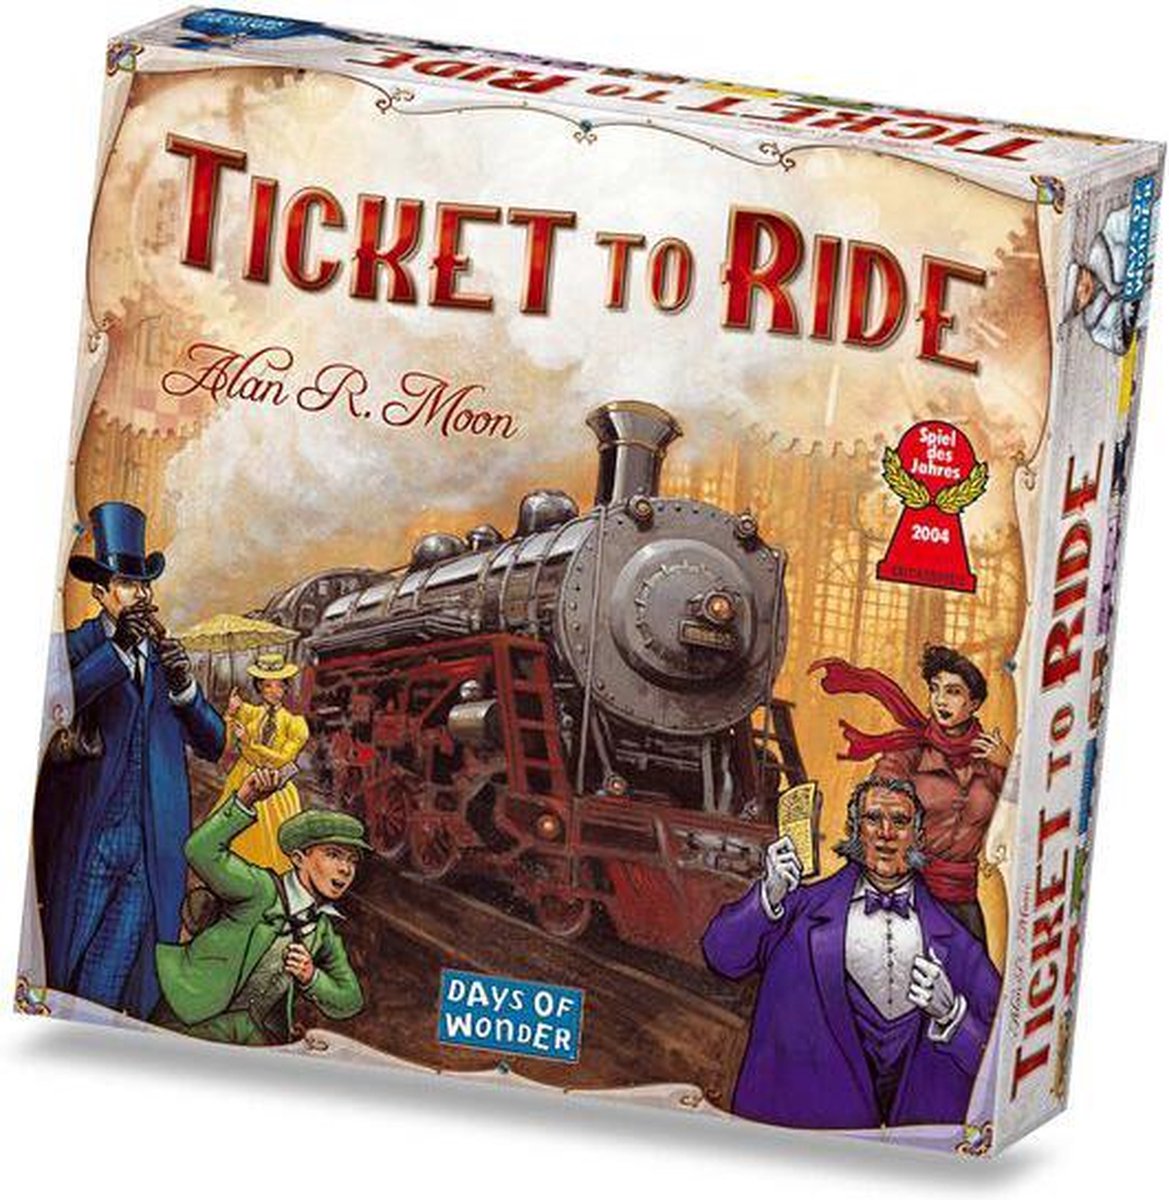 Ticket to Ride - USA